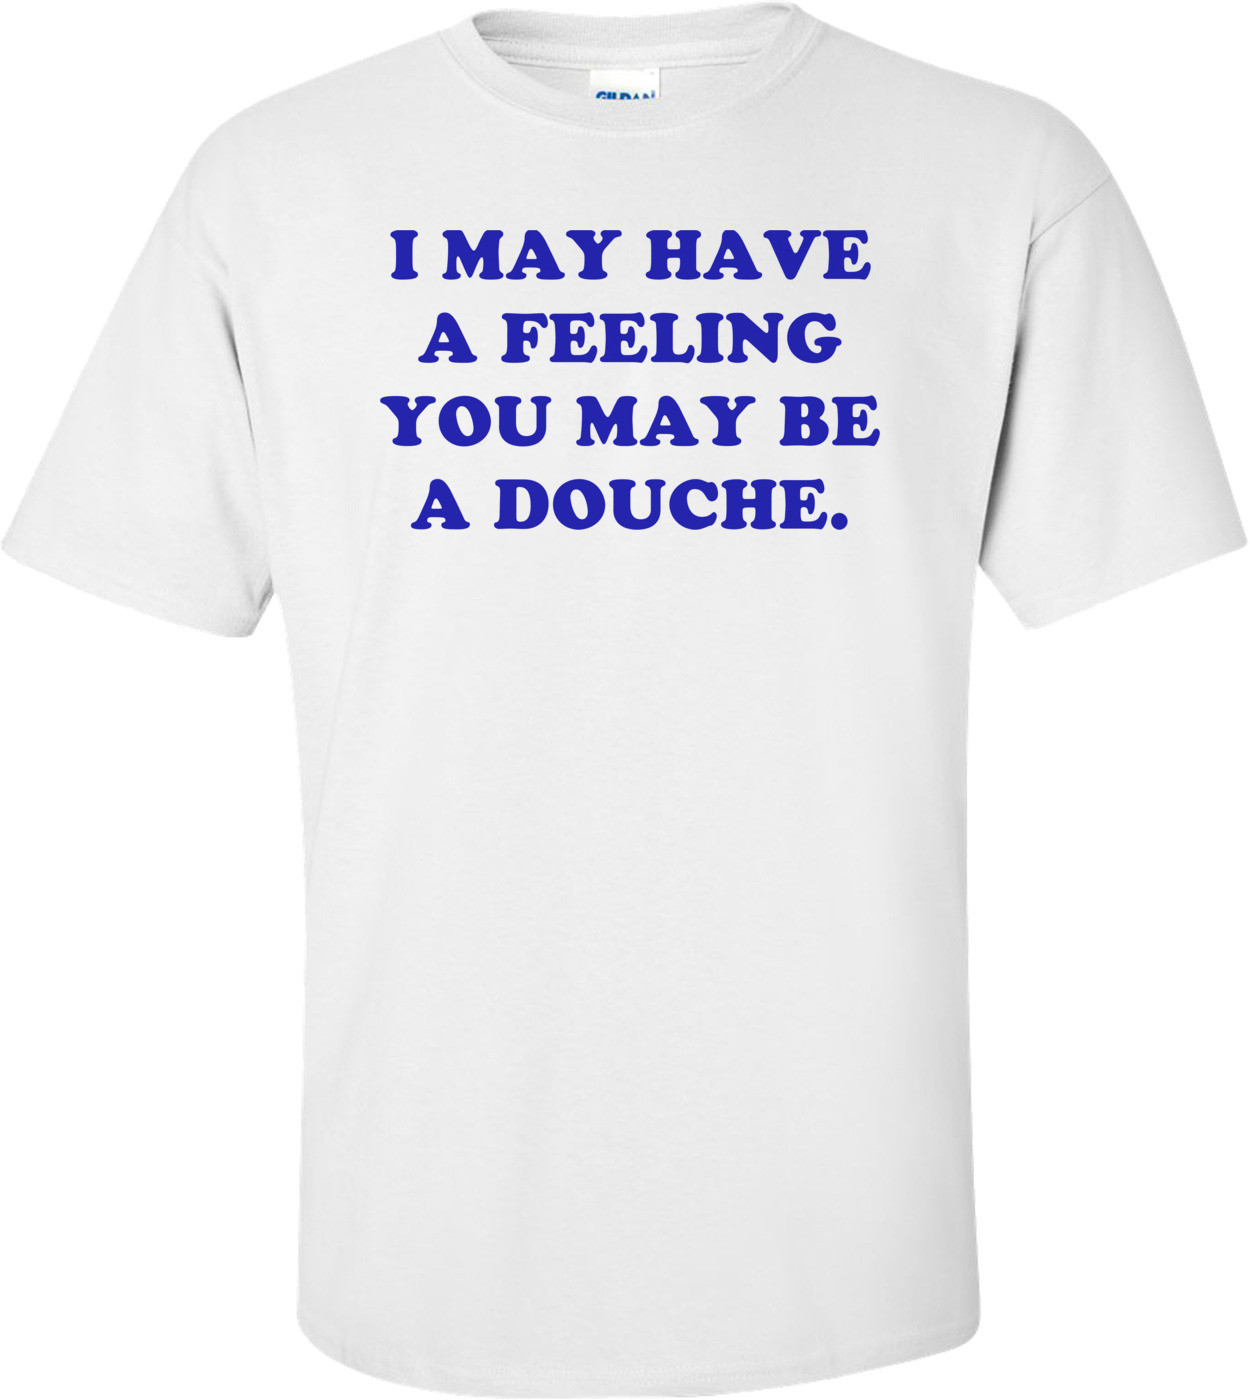 I MAY HAVE A FEELING YOU MAY BE A DOUCHE. Shirt